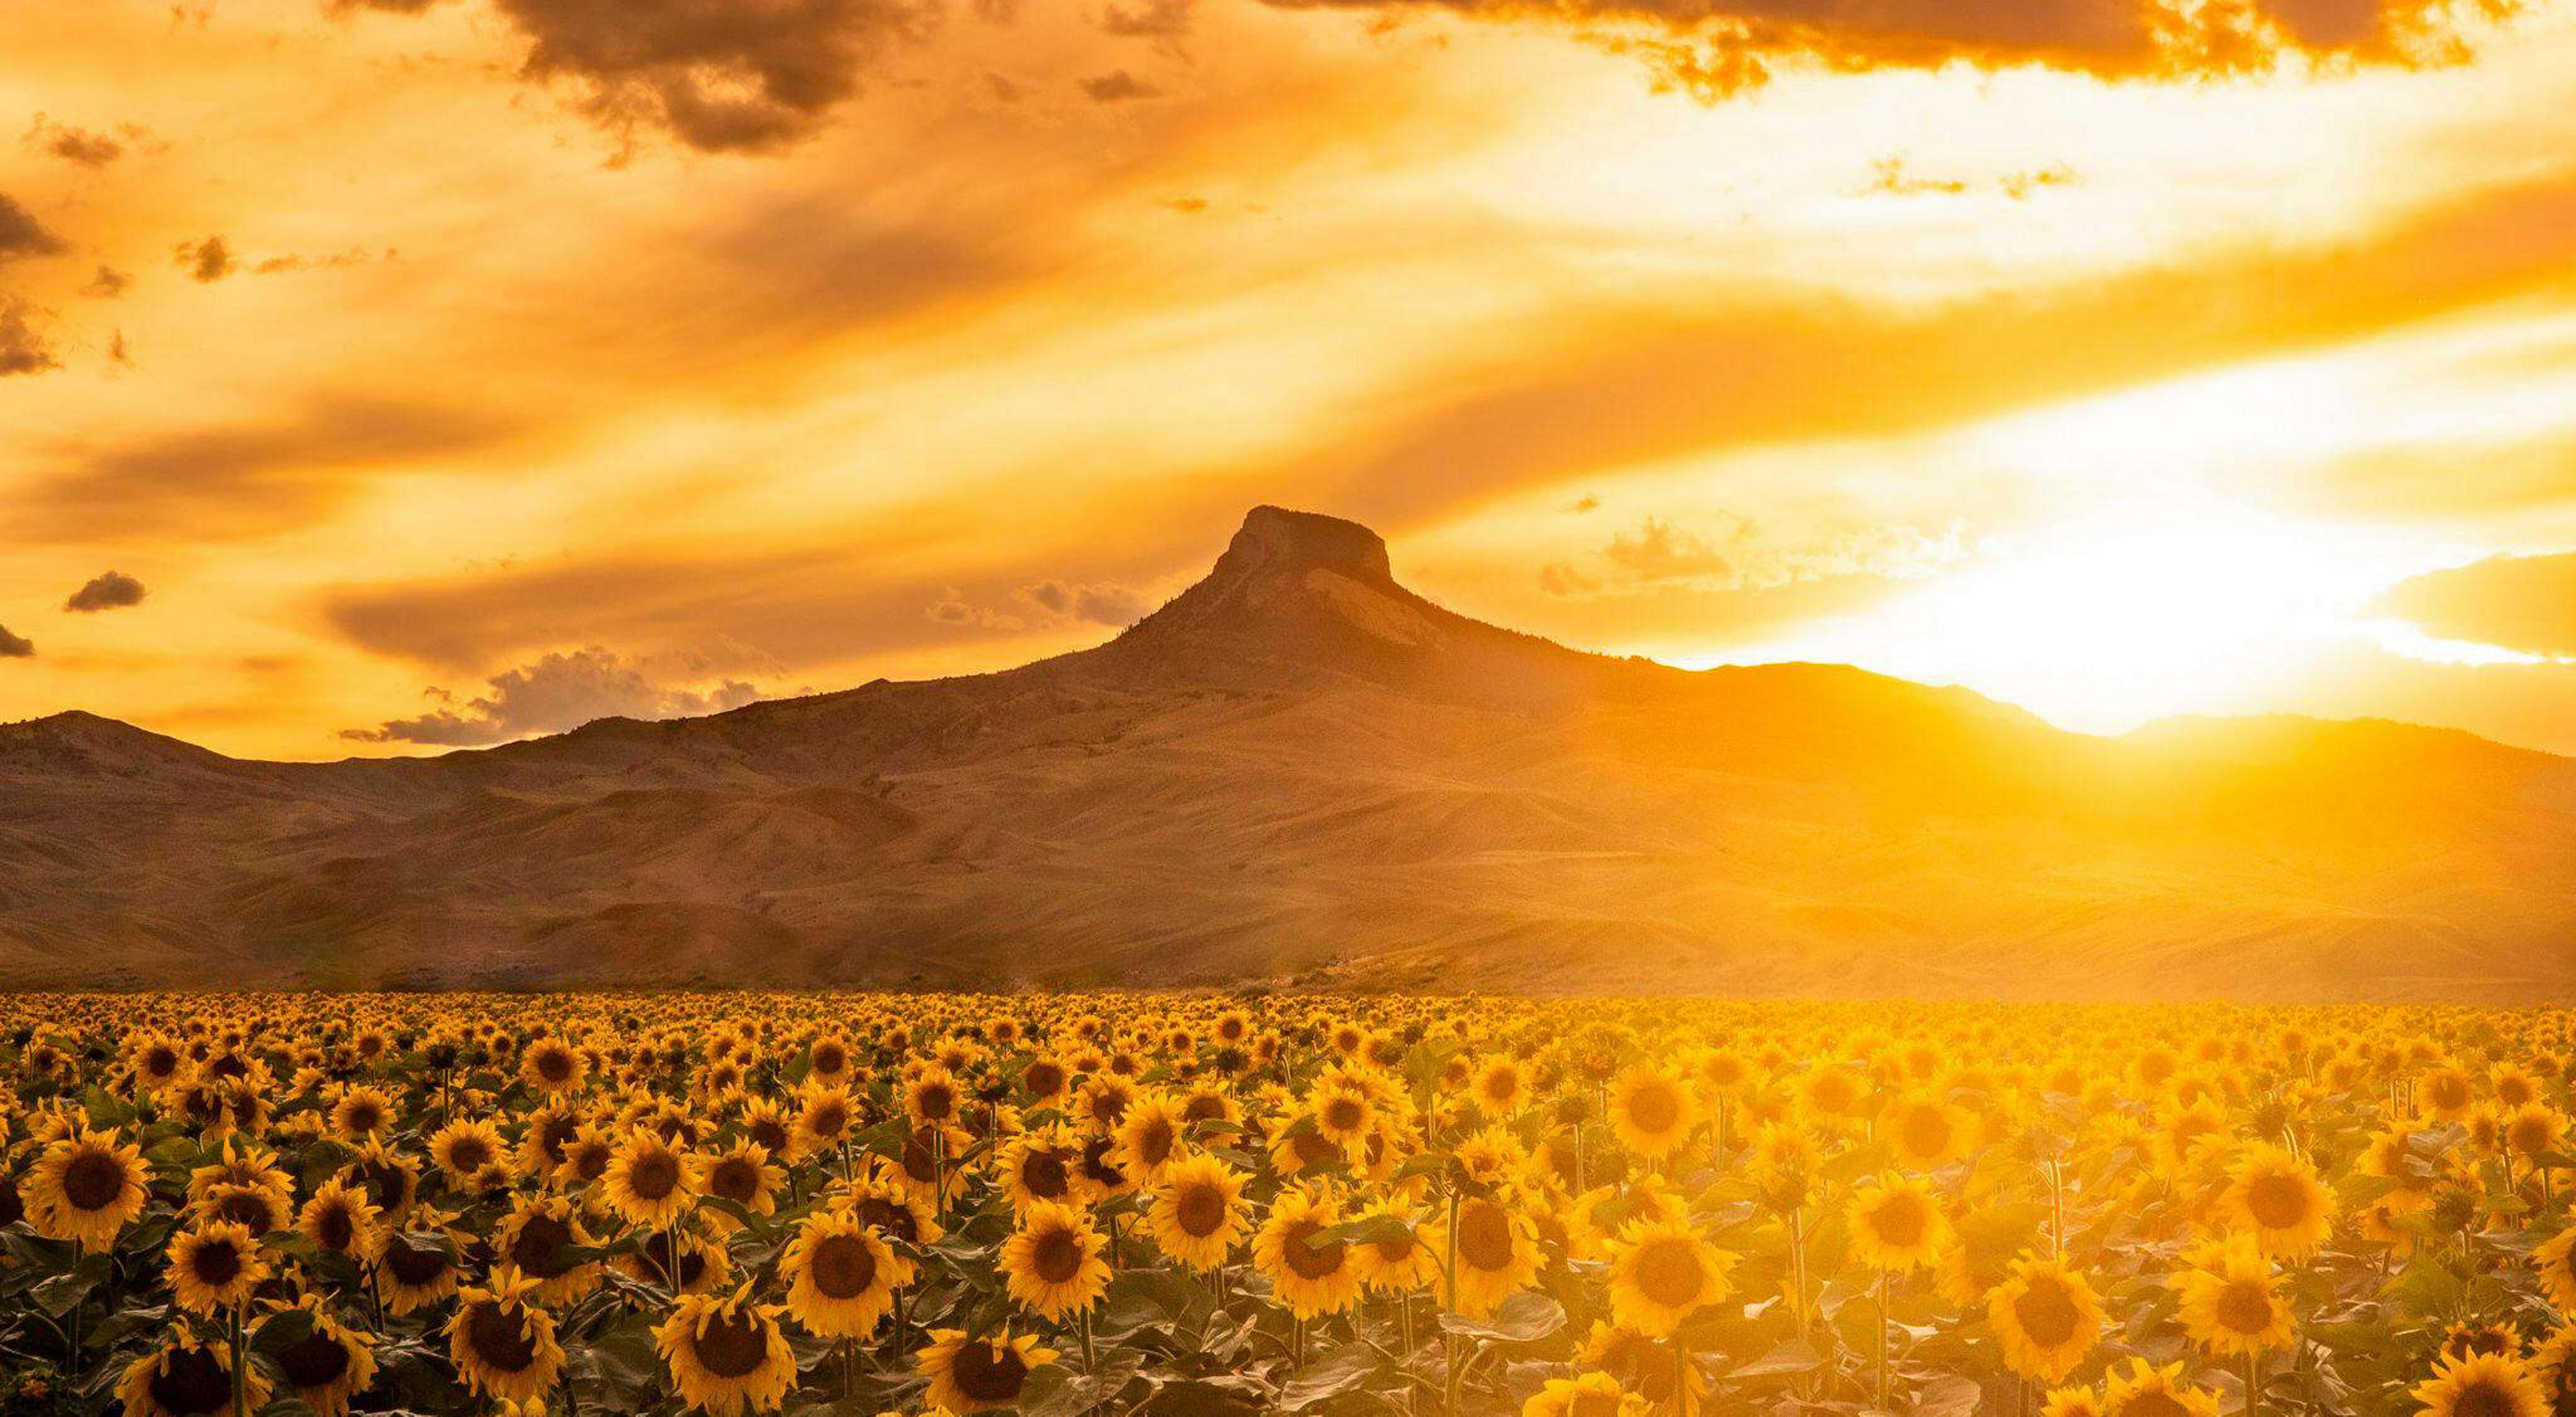 Sunflower field in front of a sunlit mountain.